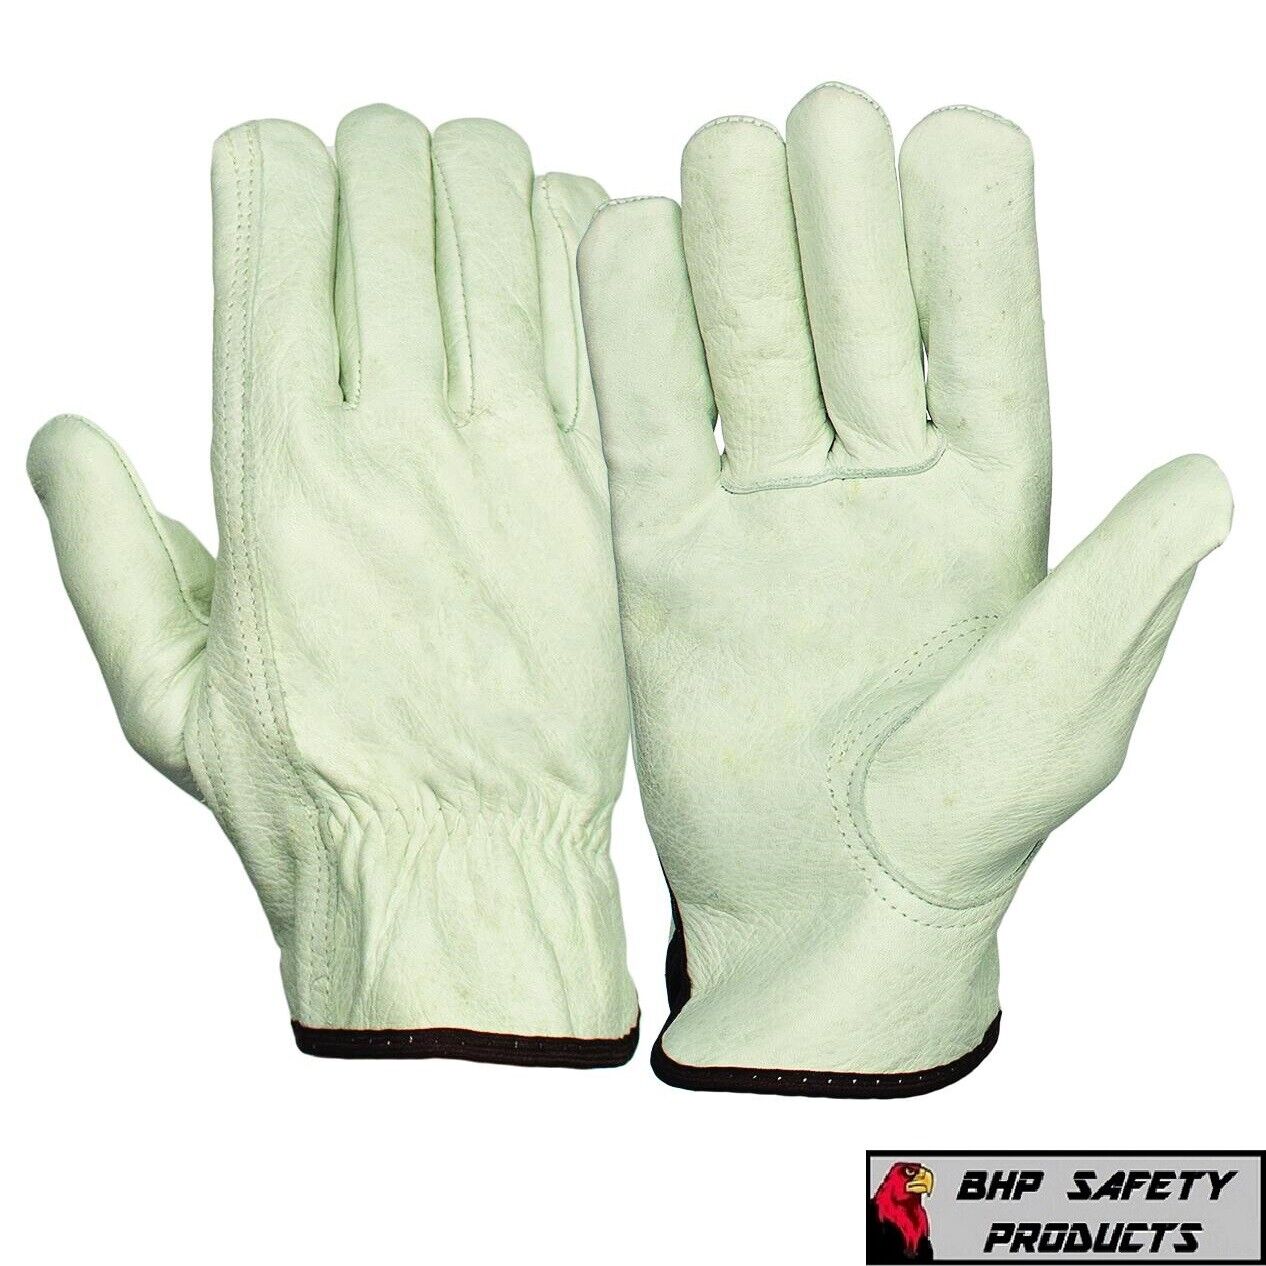 12 Pair Pack, Cowhide Grain Leather Drivers, Work Safety Gloves (PPE) All Sizes